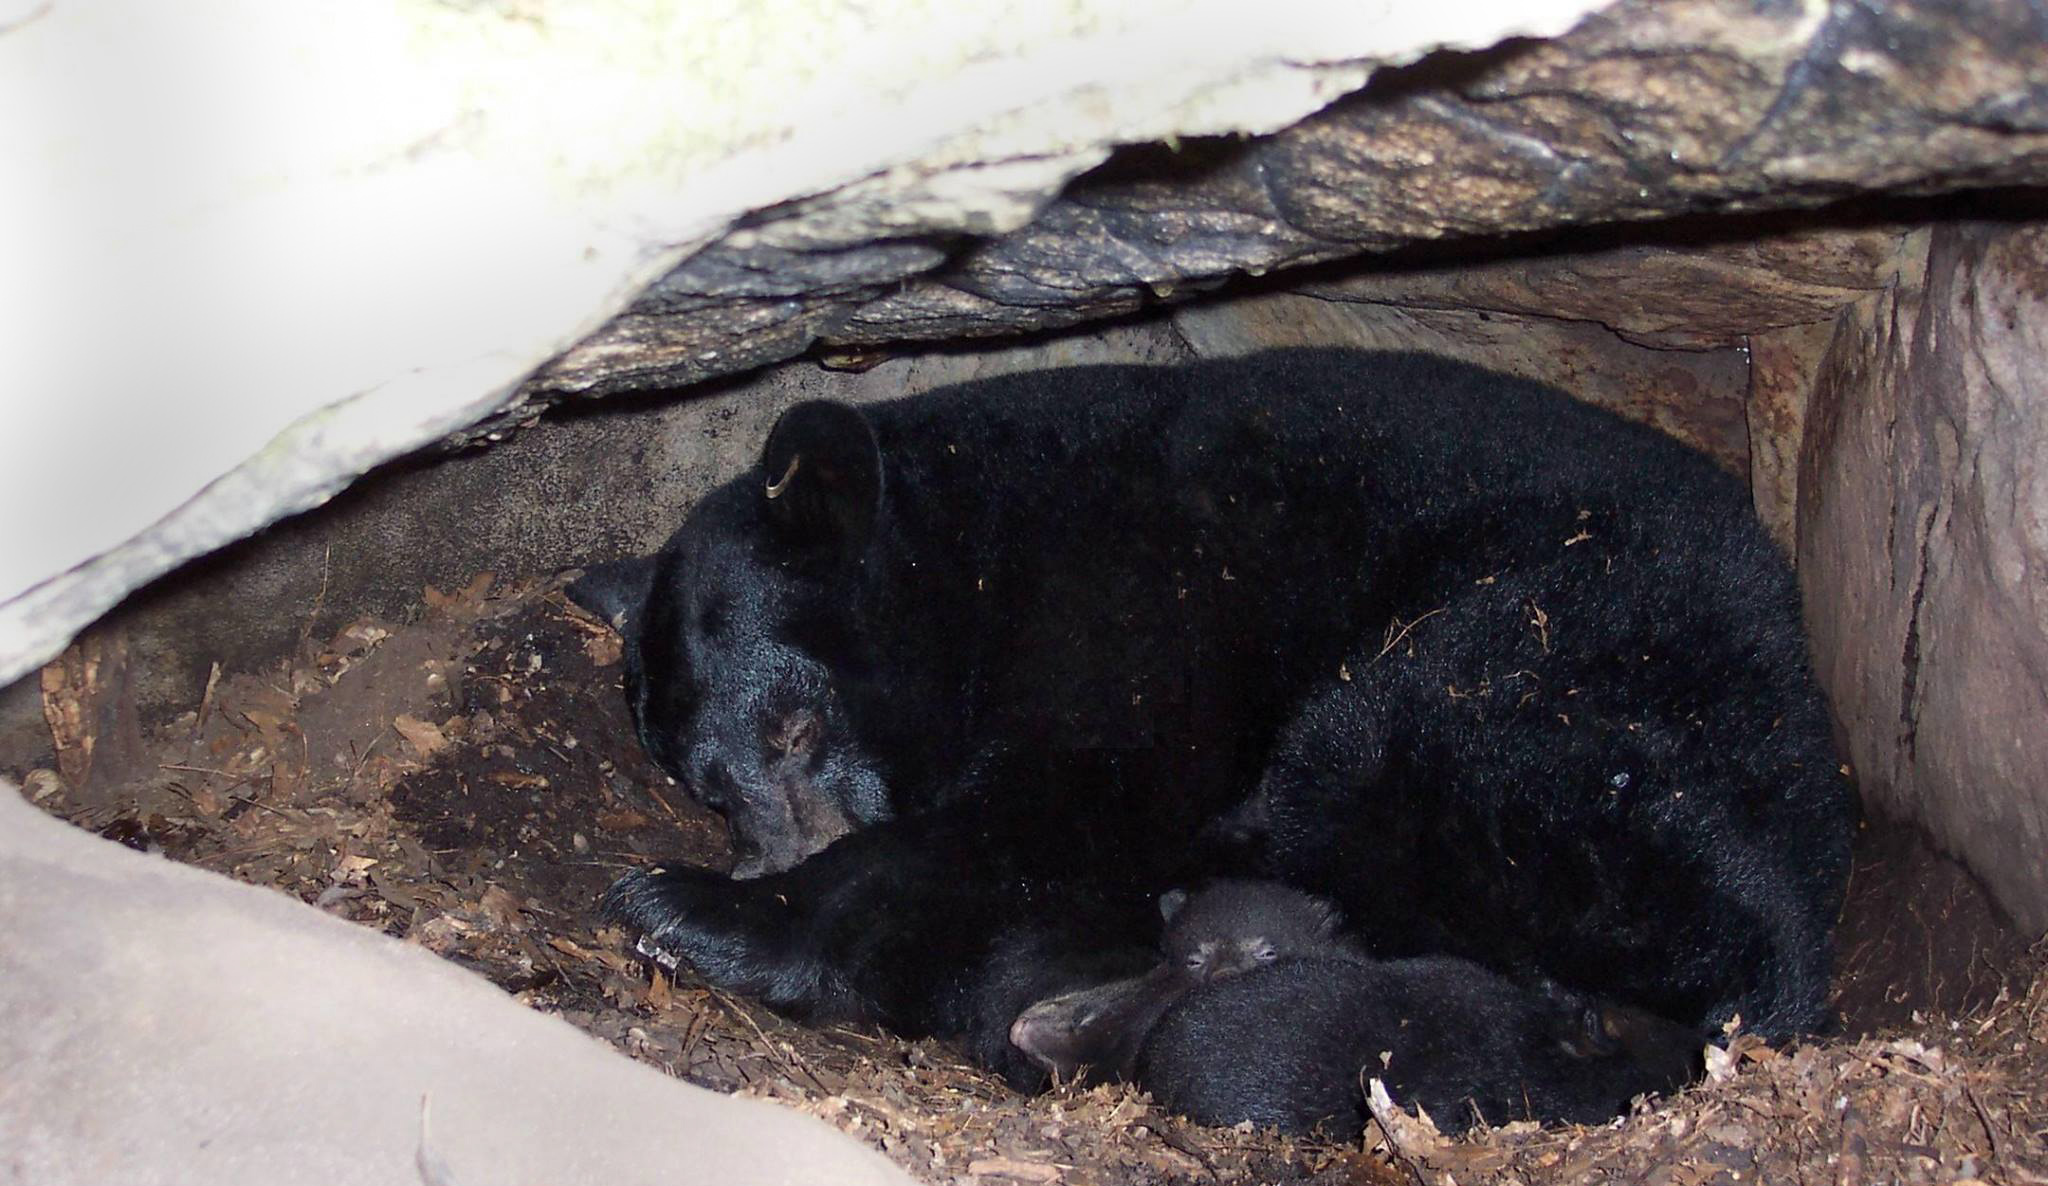 A black bear in her den with cubs.